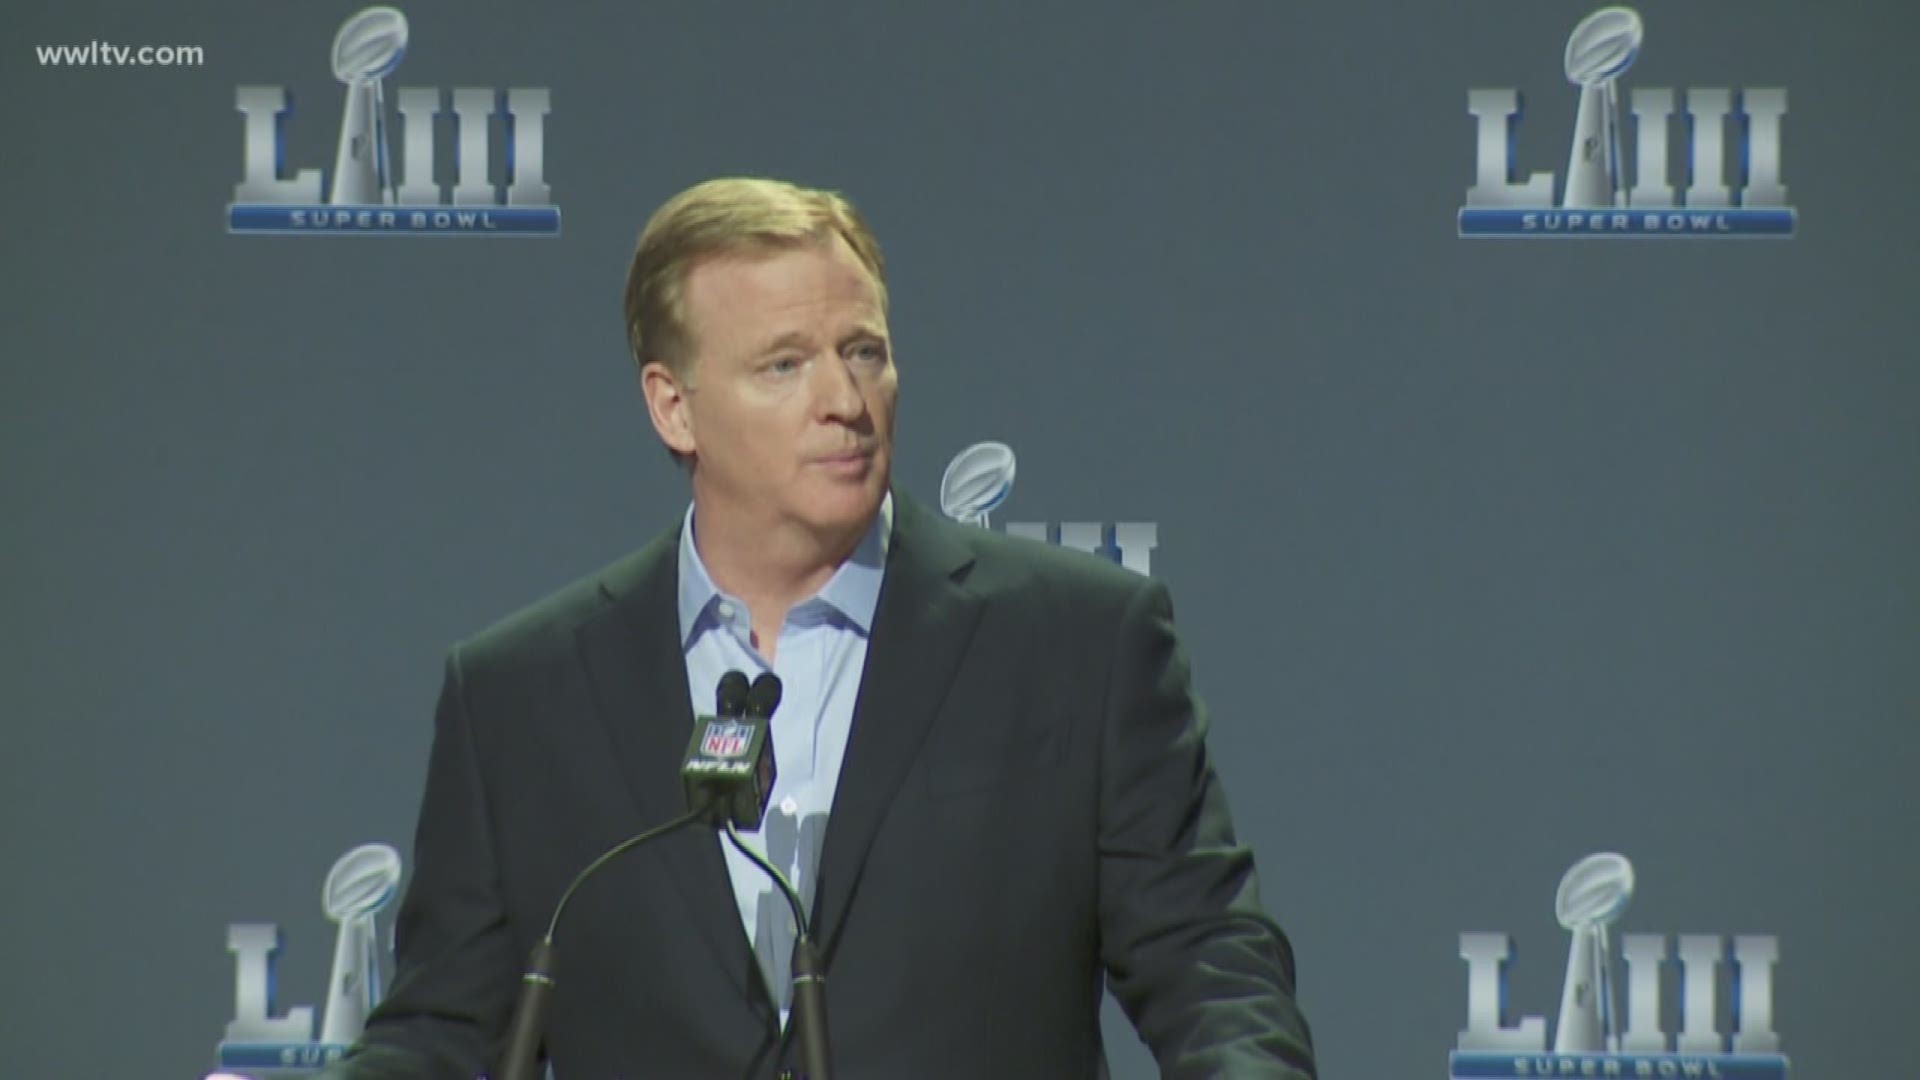 NFL Commissioner Roger Goodell finally admitted that the referees got it wrong.